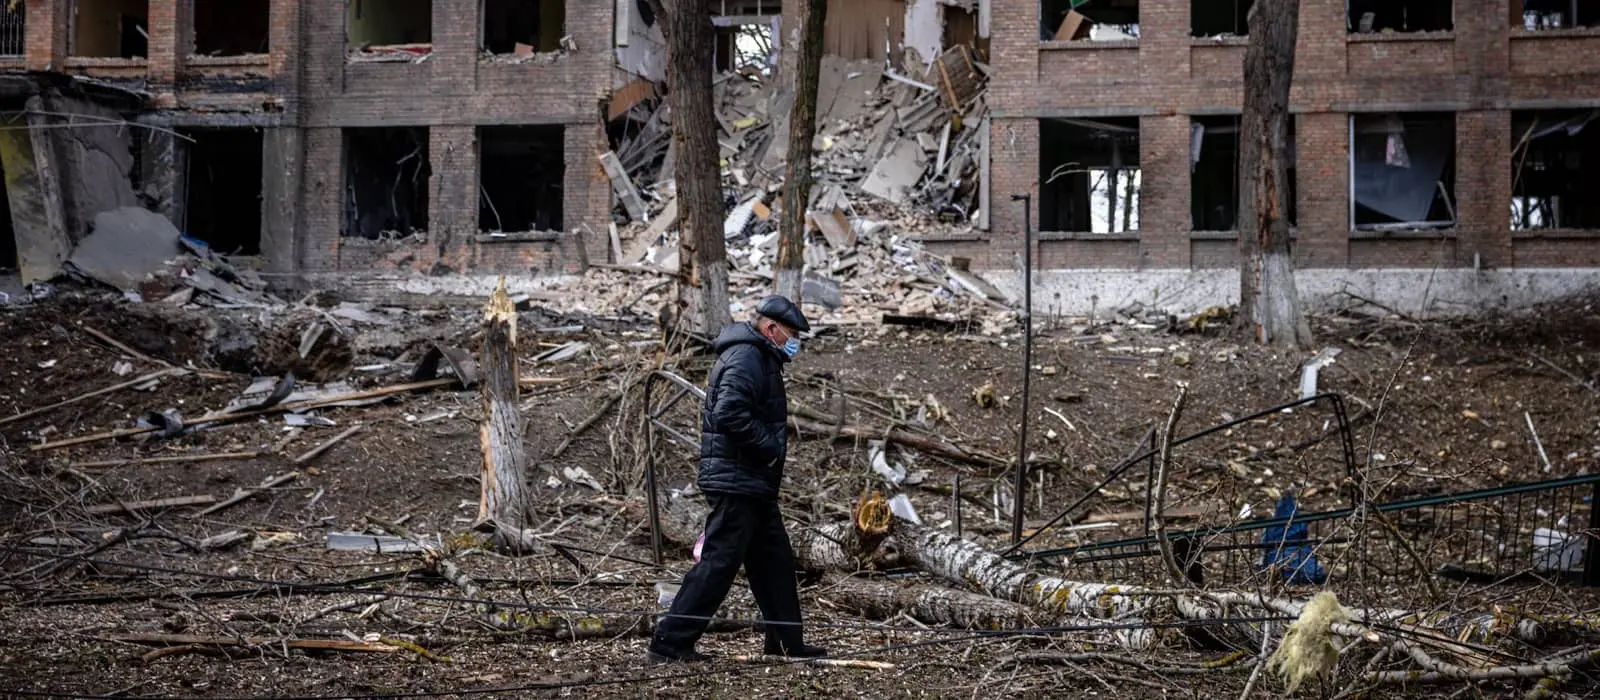 A man walks in front of a destroyed building after a Russian missile attack in the town of Vasylkiv, near Kyiv, on February 27, 2022